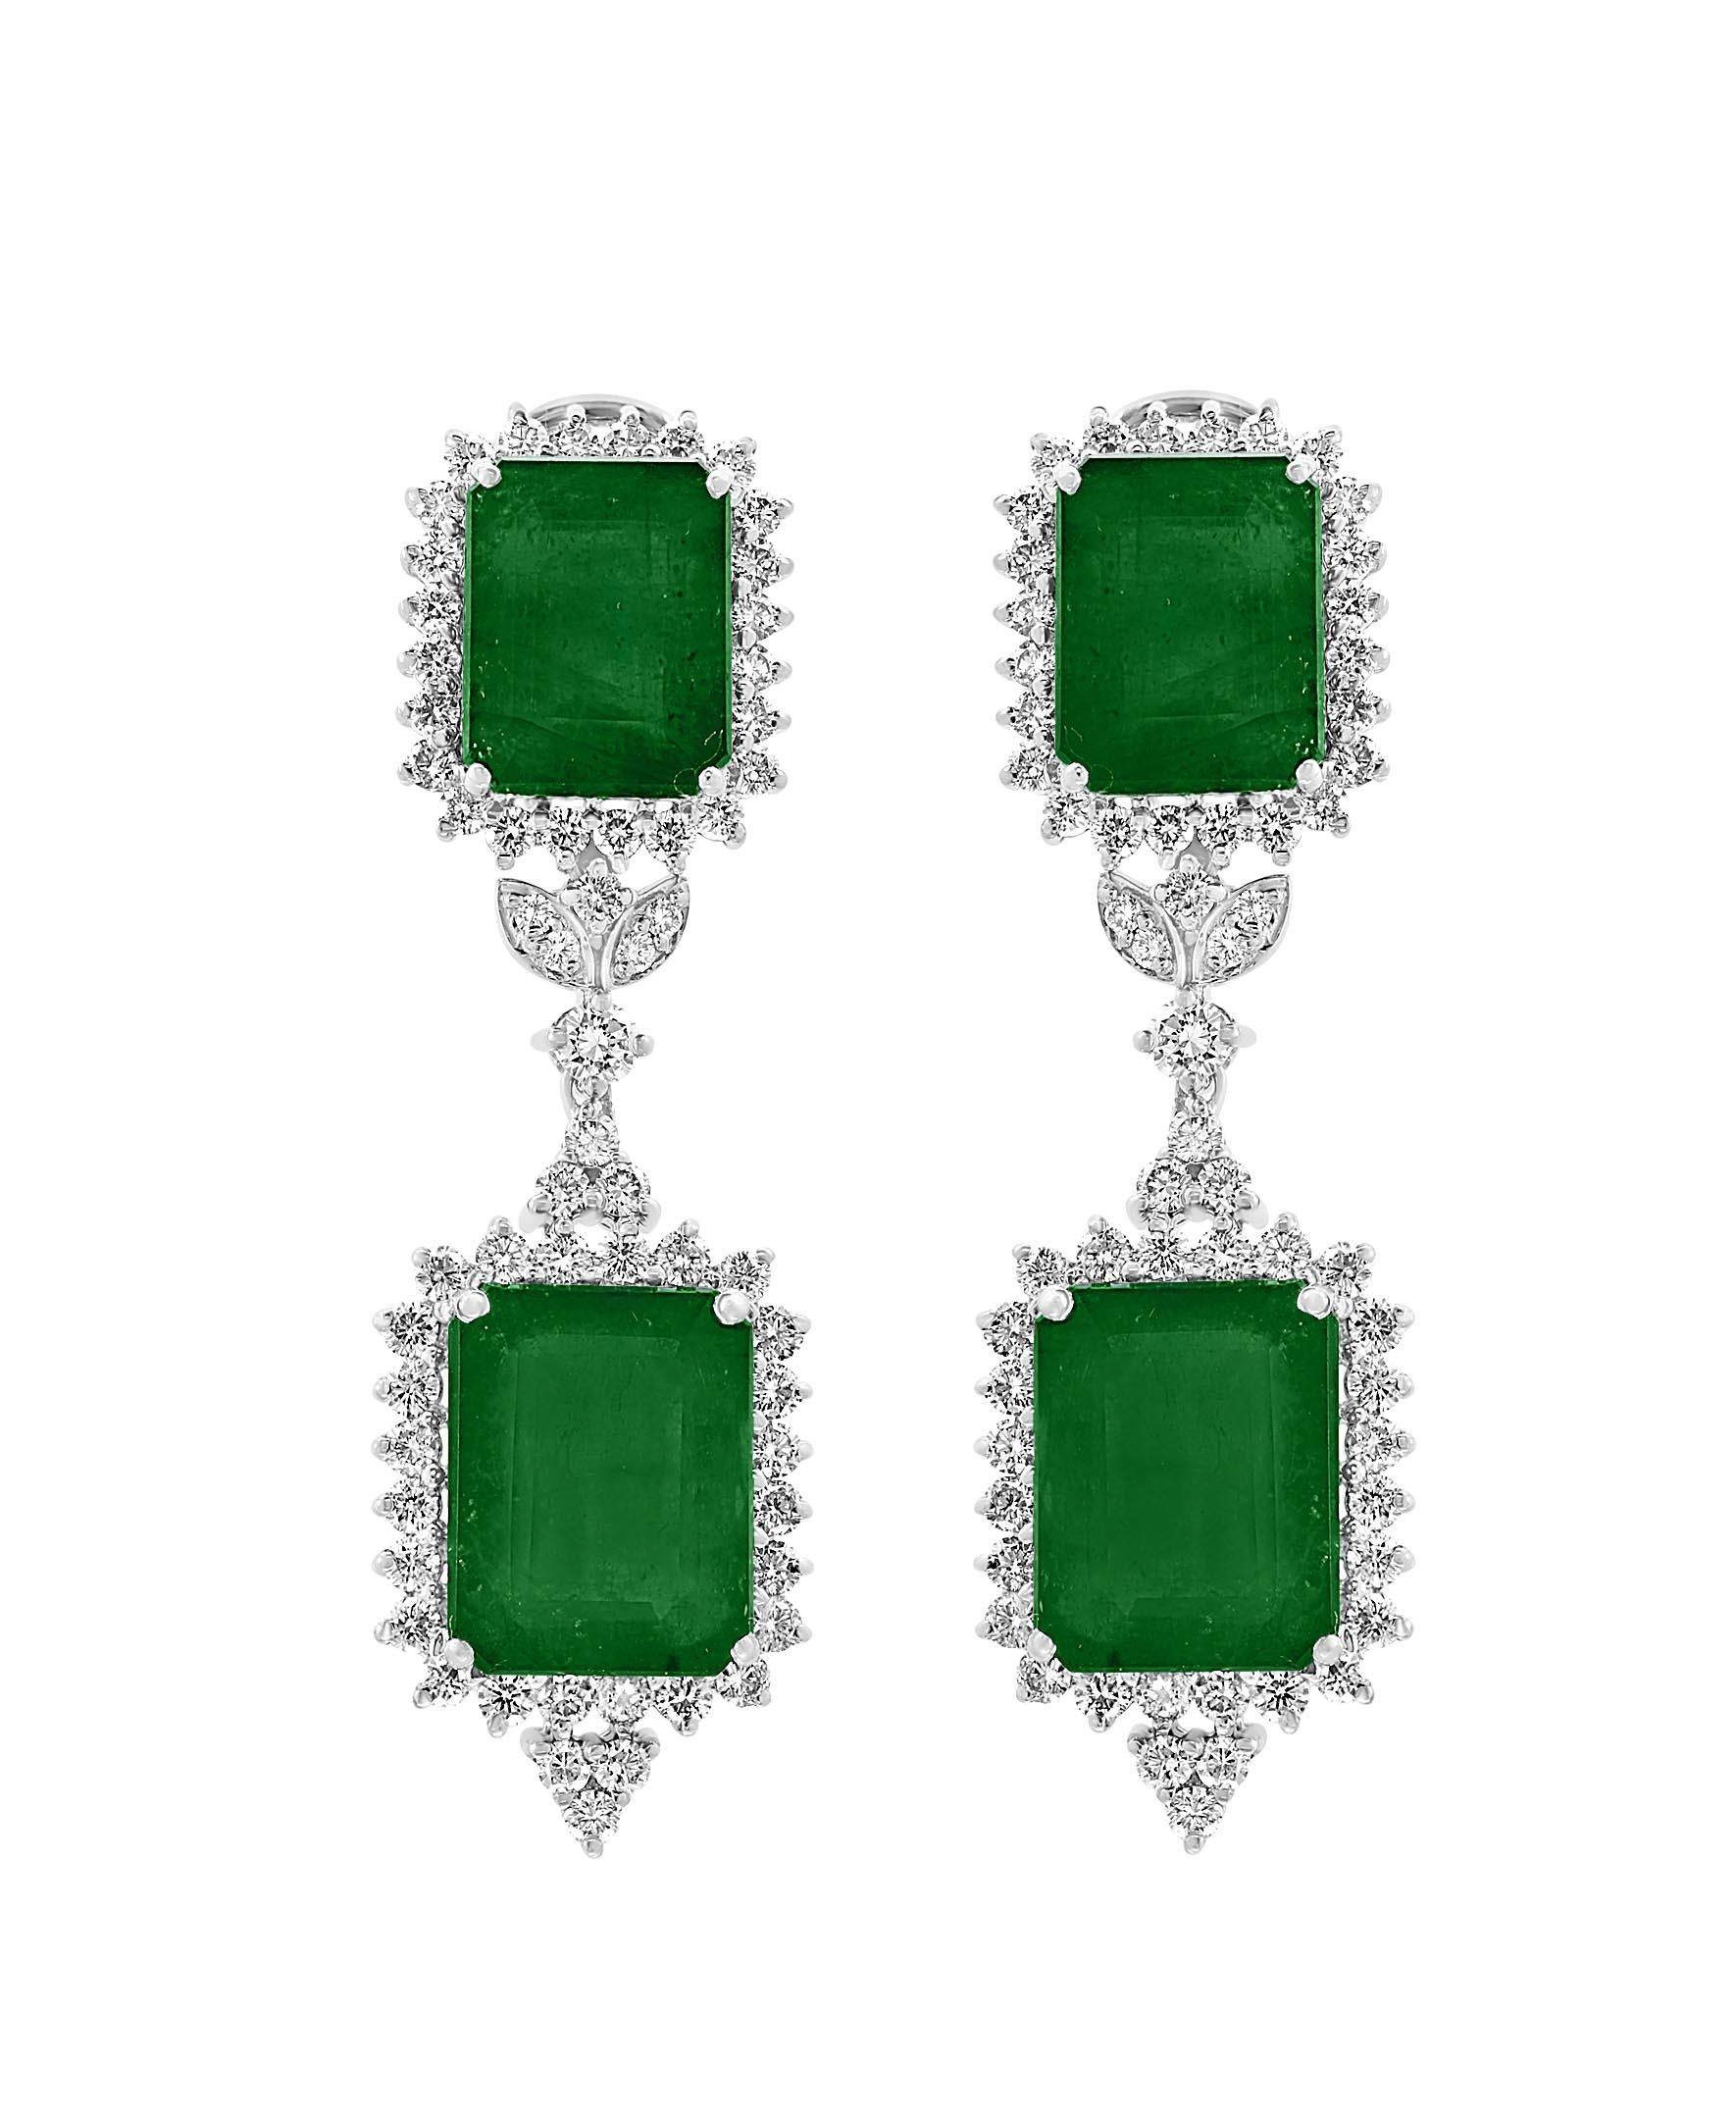 Emerald Cut GIA Certified 135 Ct Emerald and 28 Ct Diamond Necklace and Earring Bridal Suite